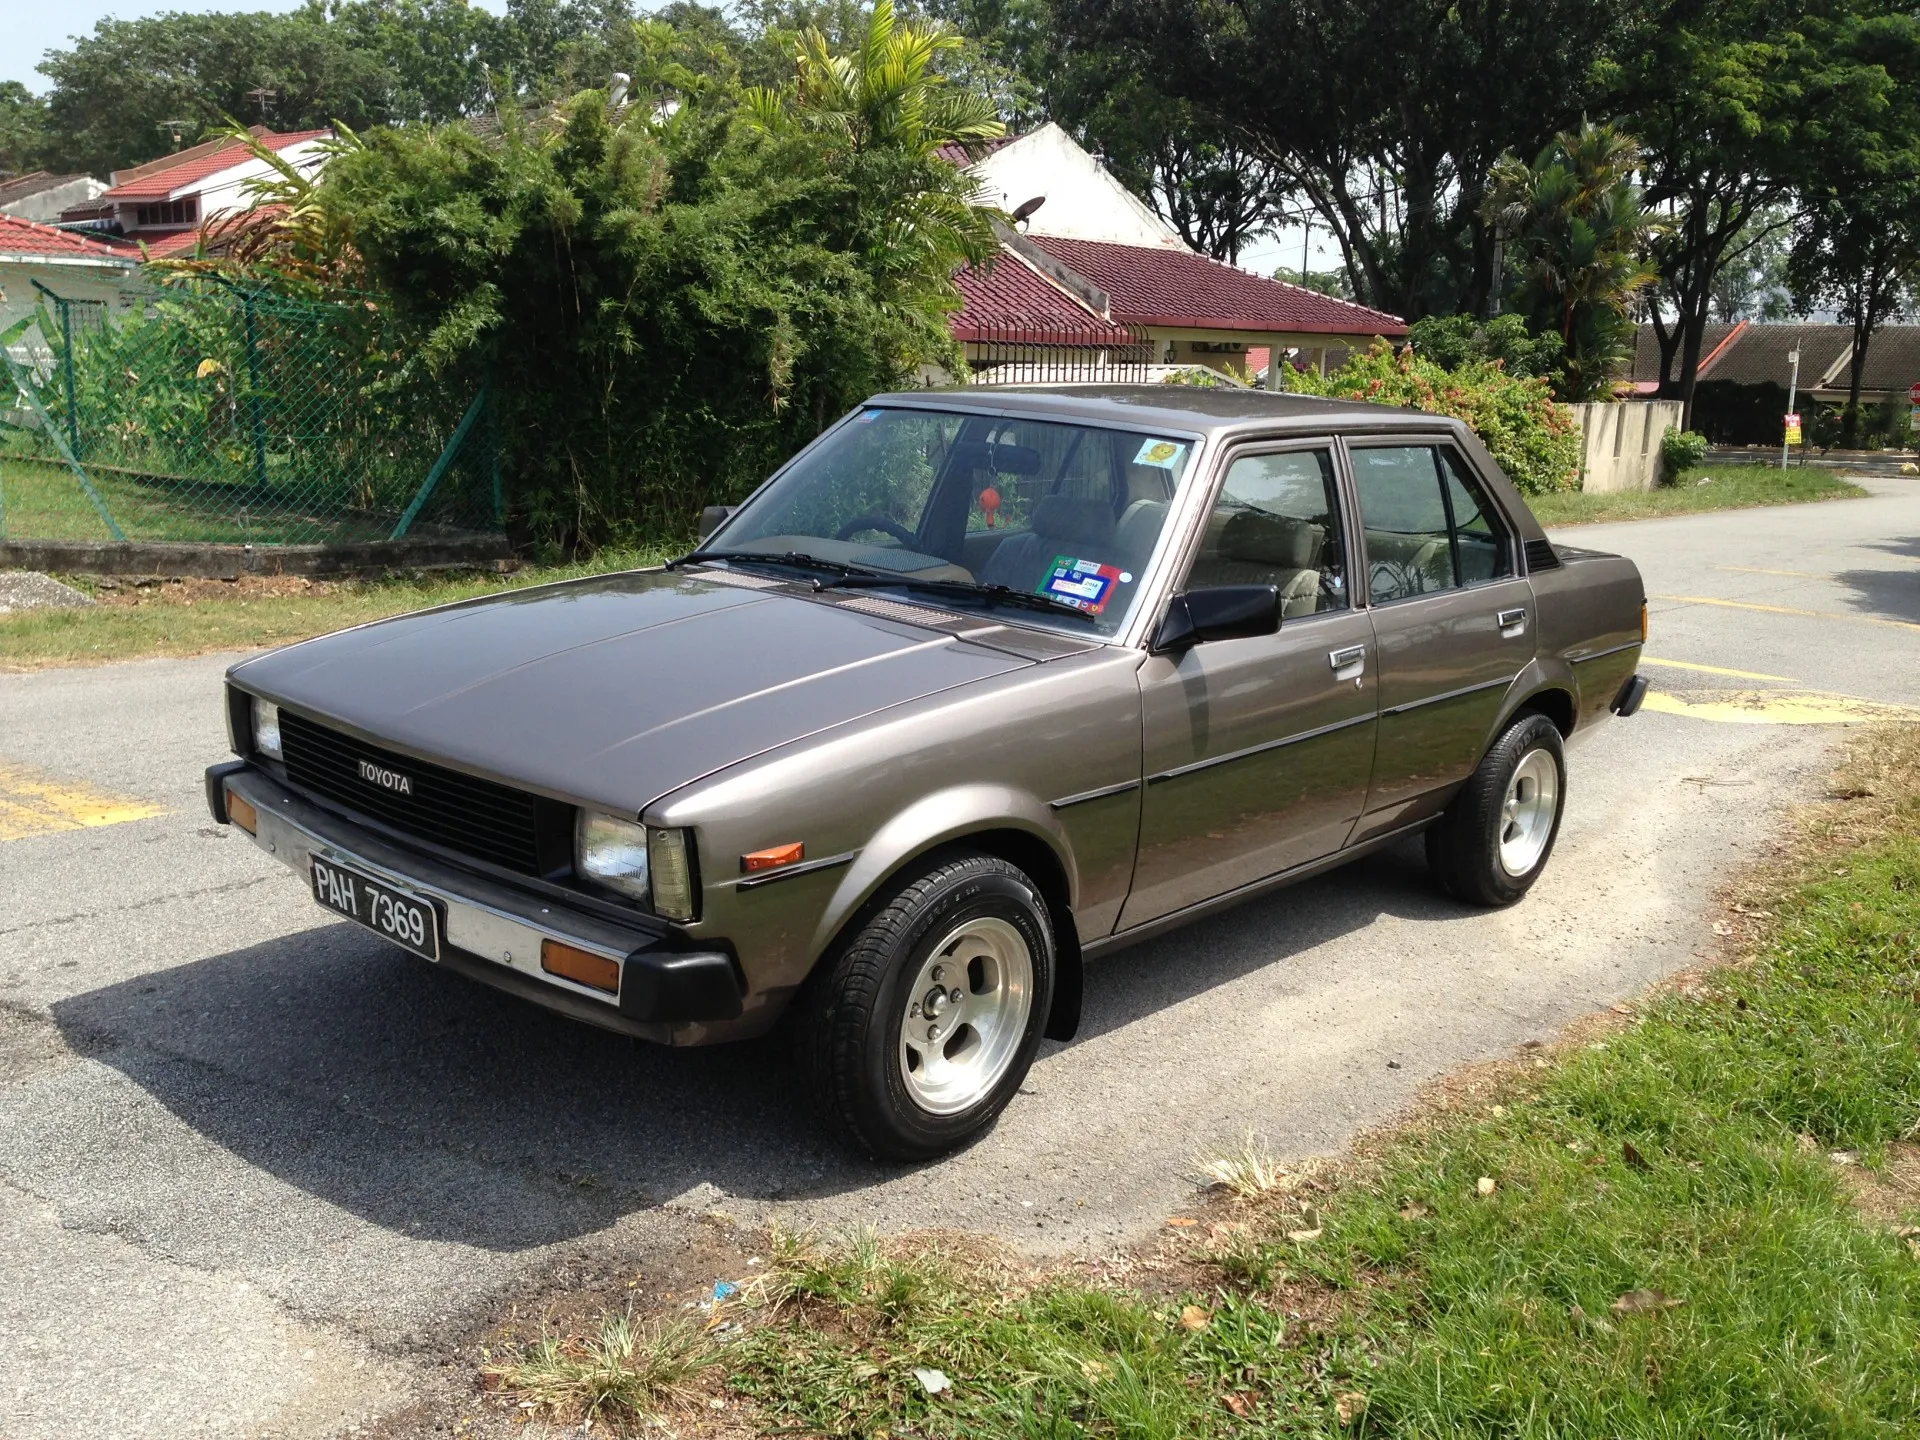 My Toyota Corolla KE70 is from 1981 and has been driven all the way to Perlis and back with no issues...